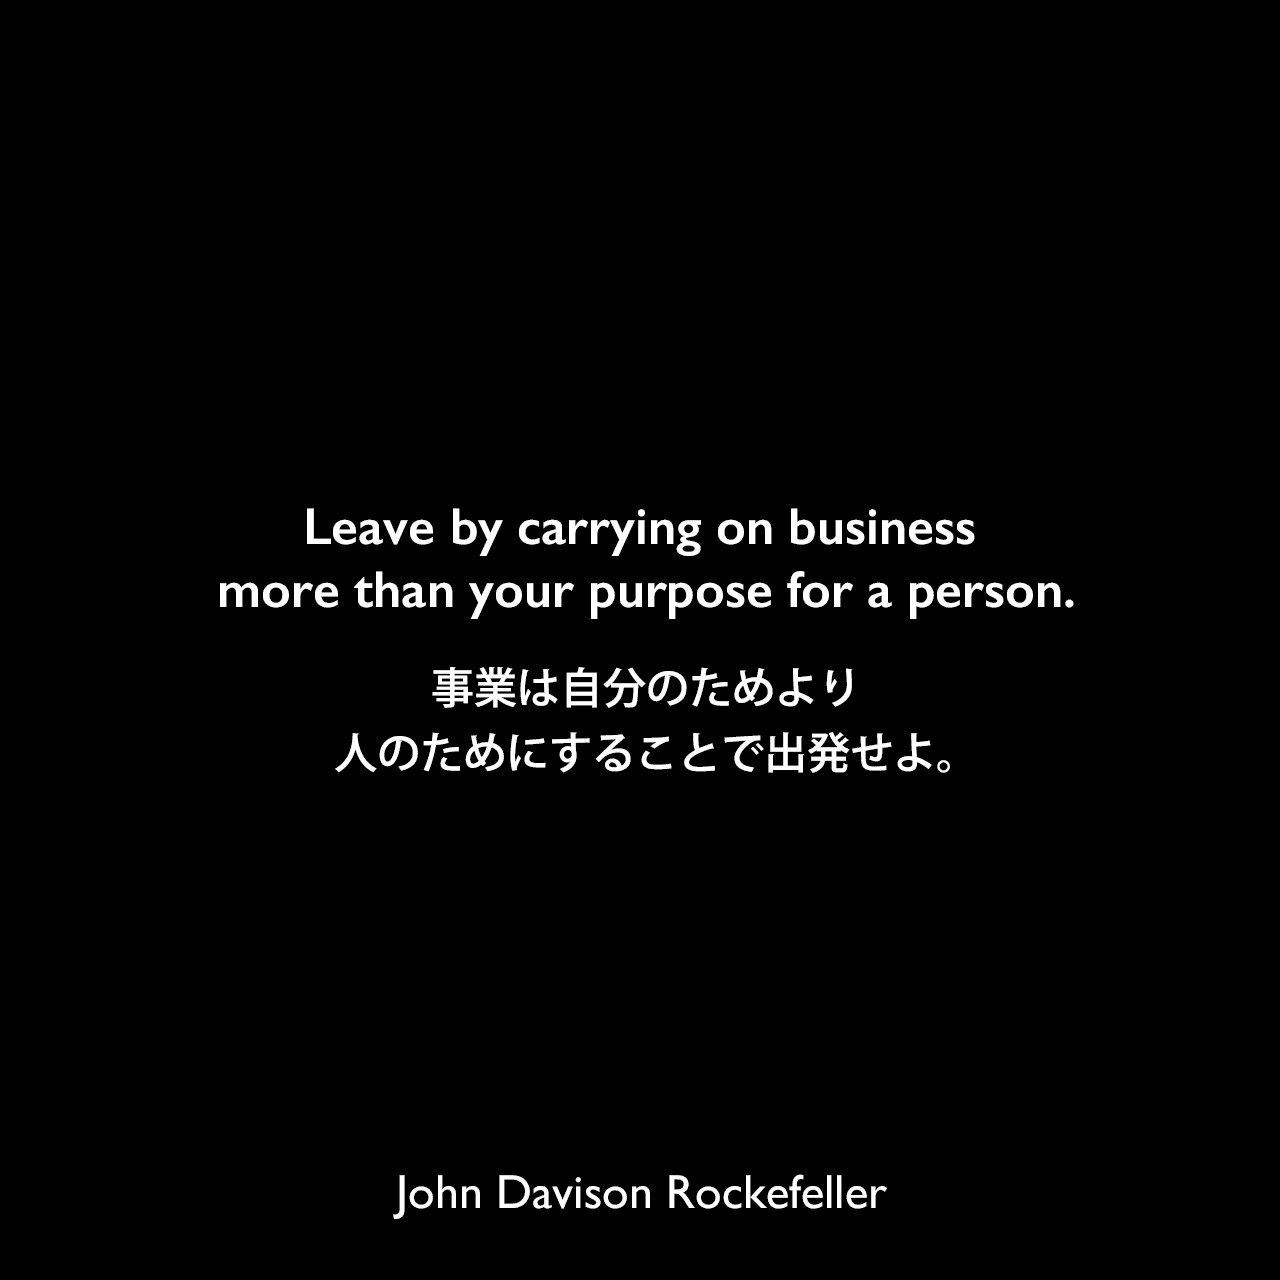 Leave by carrying on business more than your purpose for a person.事業は自分のためより、人のためにすることで出発せよ。John Davison Rockefeller